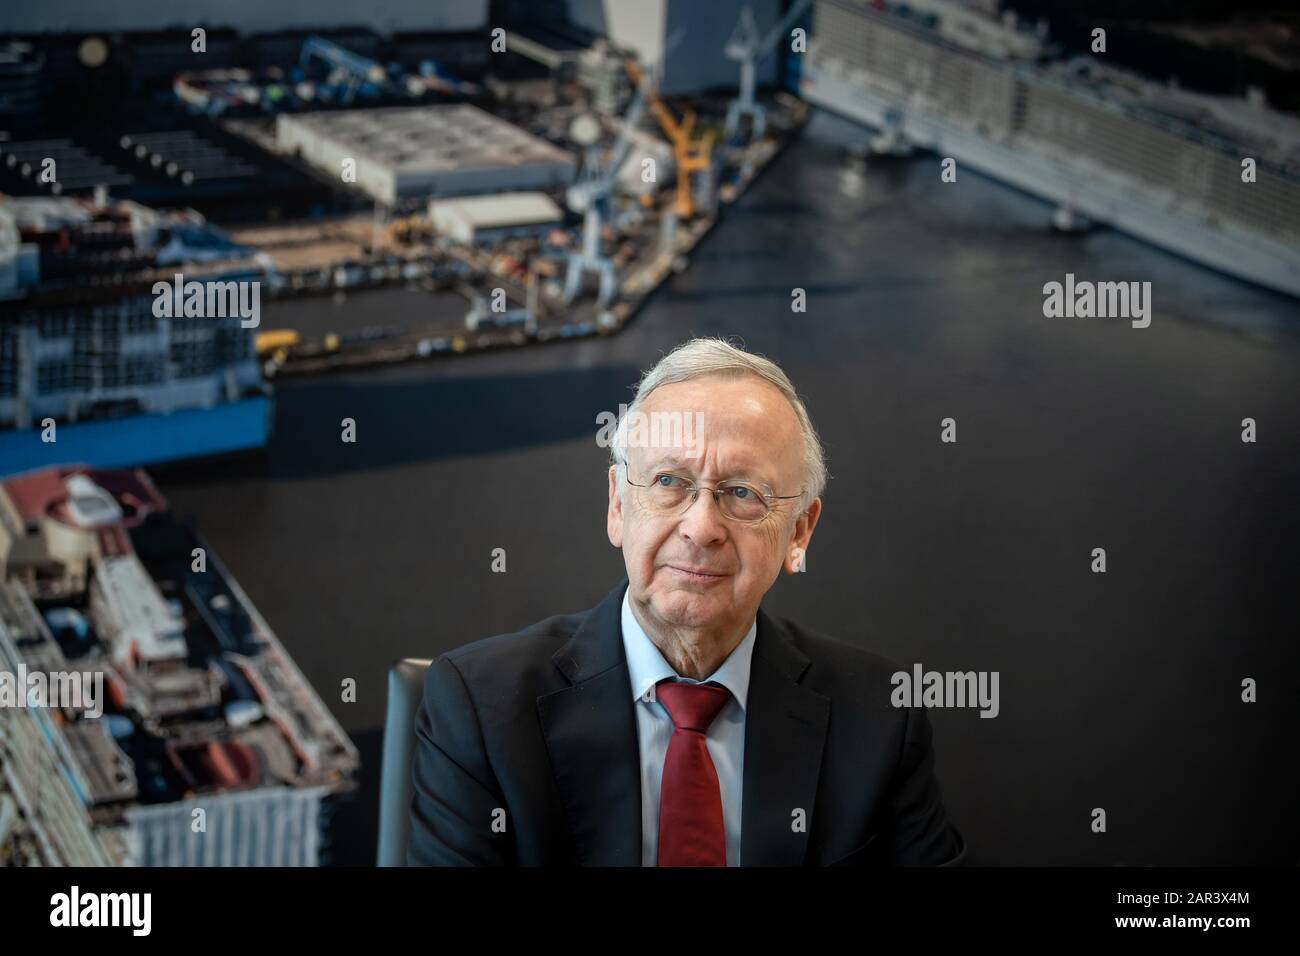 Papenburg, Germany. 22nd Jan, 2020. Bernard Meyer, Managing Director of Meyer Werft Papenburg, gives an interview. The Meyer shipyard in Emsland - known for building giant cruise ships - celebrates the 225th anniversary of the company's foundation on 28 January. Credit: Sina Schuldt/dpa/Alamy Live News Stock Photo